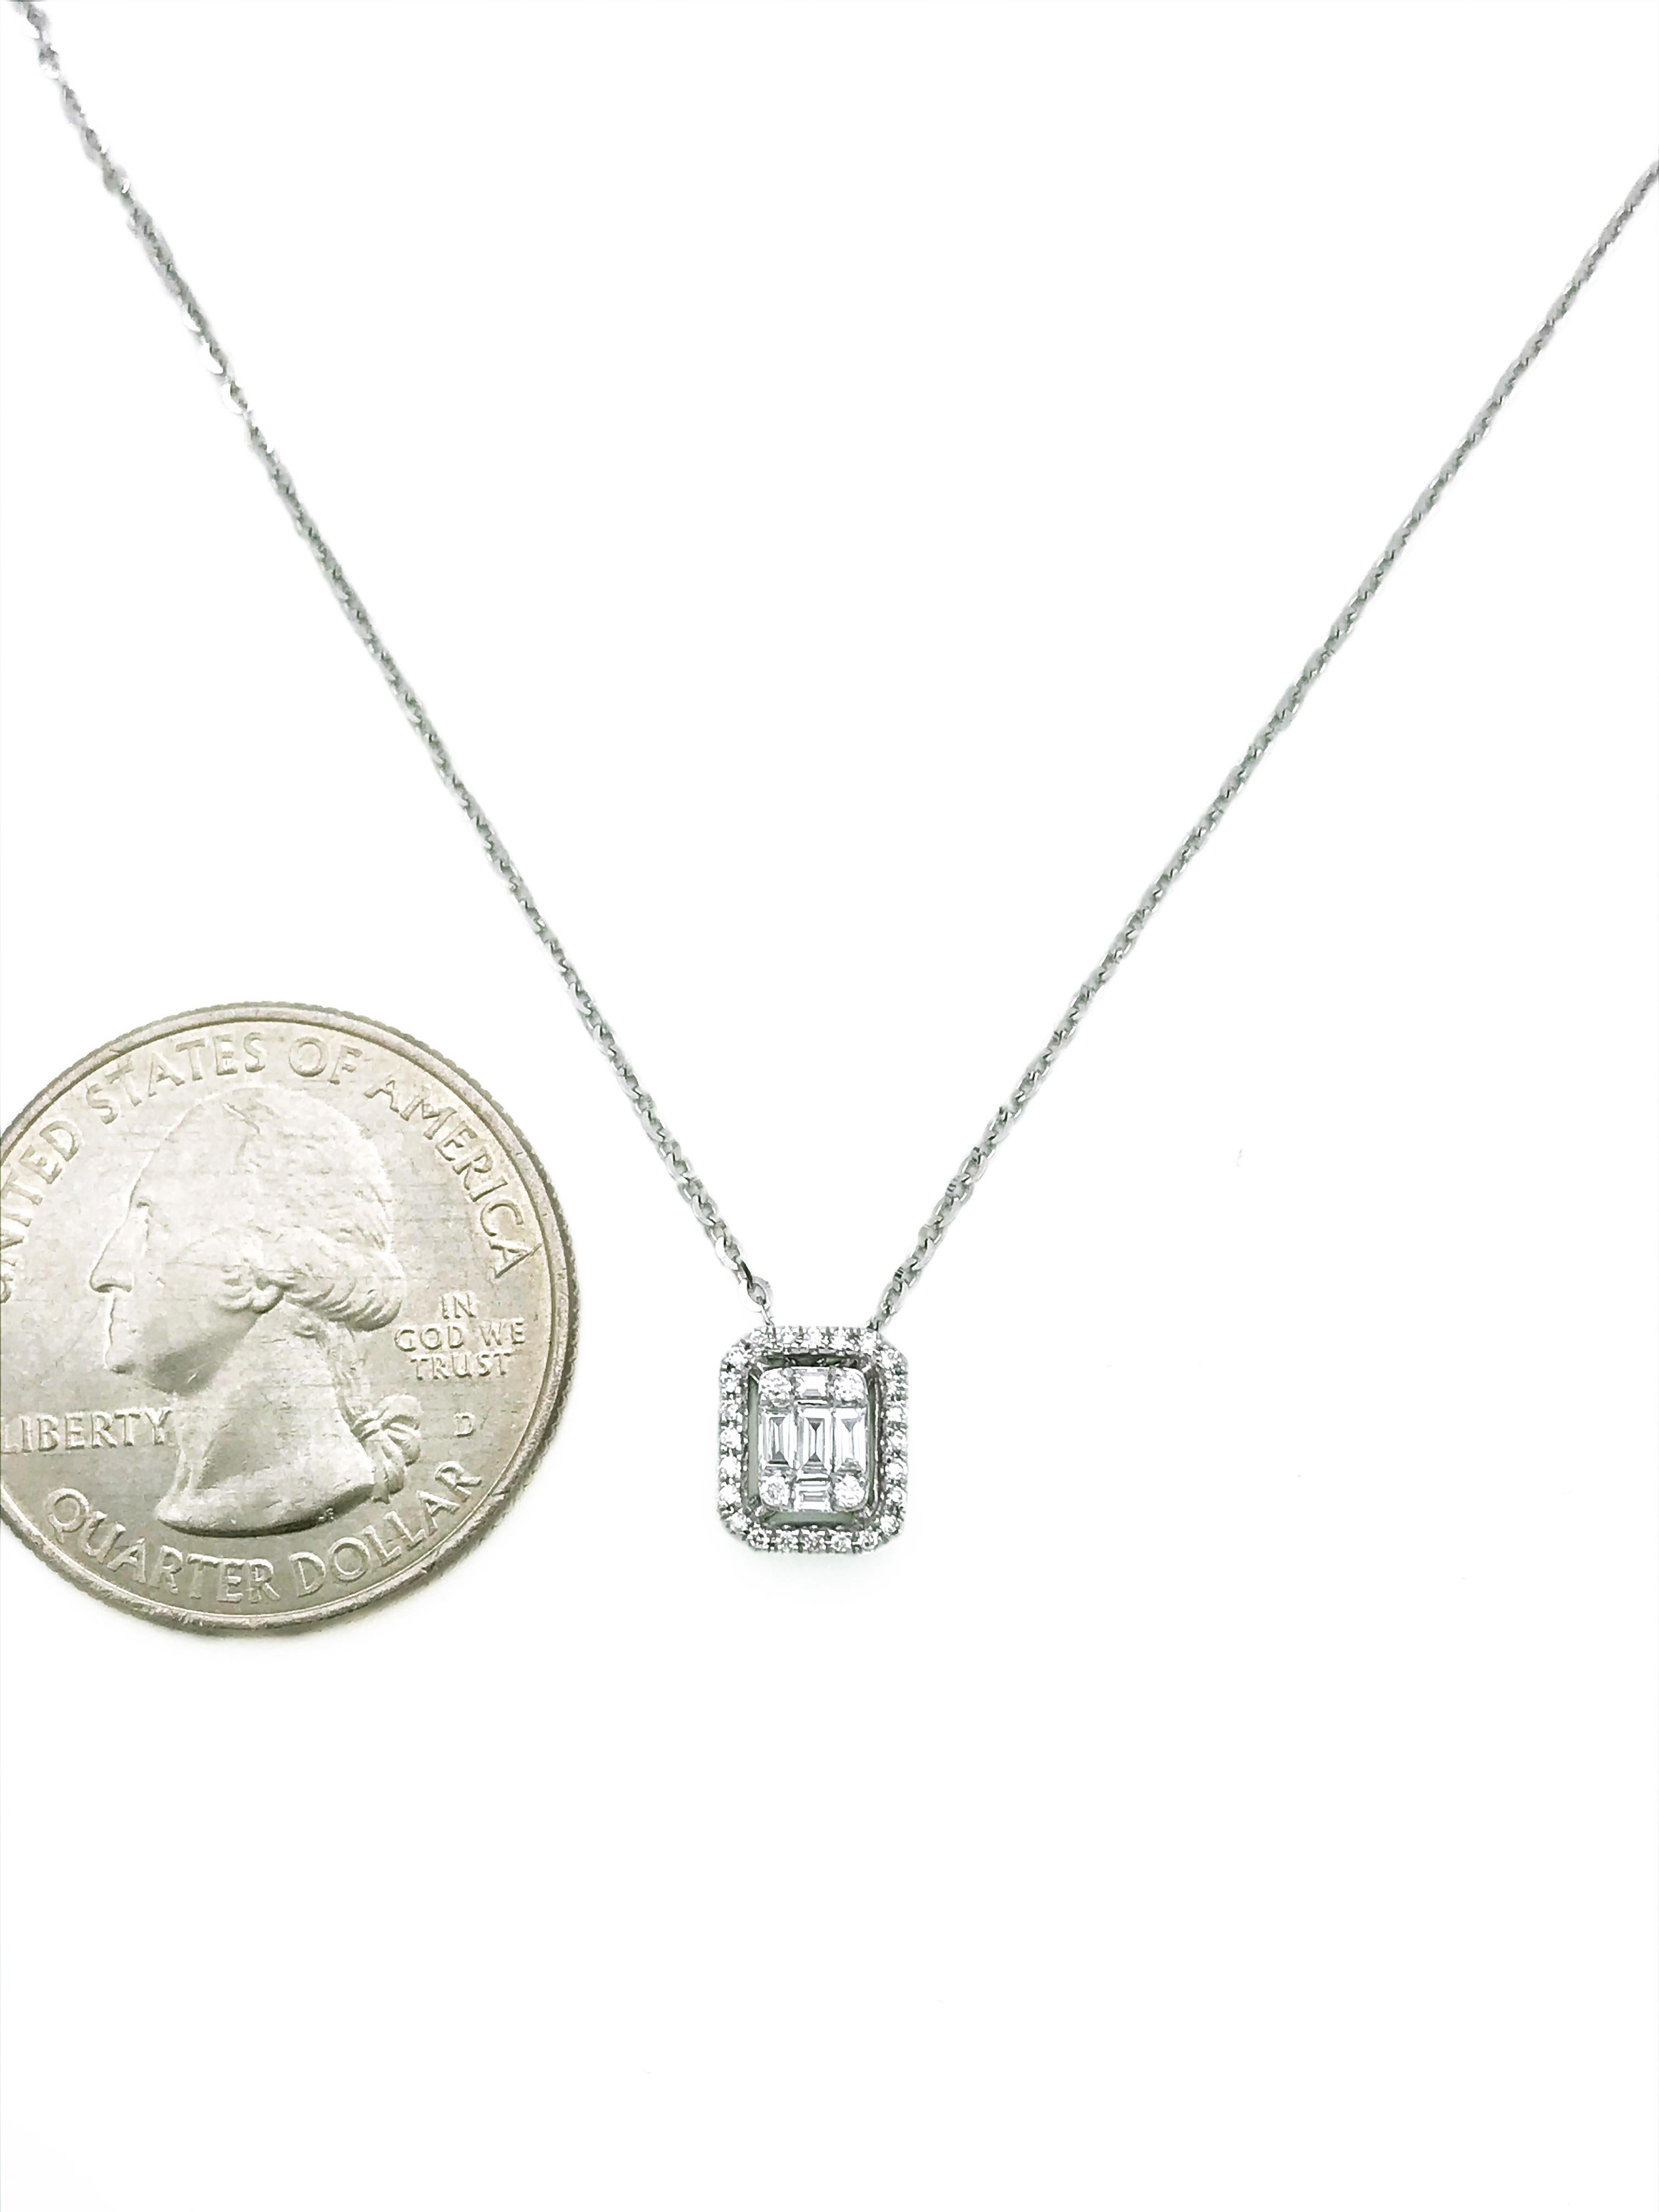 This diamond halo pendant necklace features 33 diamonds of VS2 clarity. The center of the pendant consists of round and baguette cut diamonds.

This is a one of a kind design. You will receive the necklace in the pictures.

▸ ▸ ▸ Details ◂ ◂